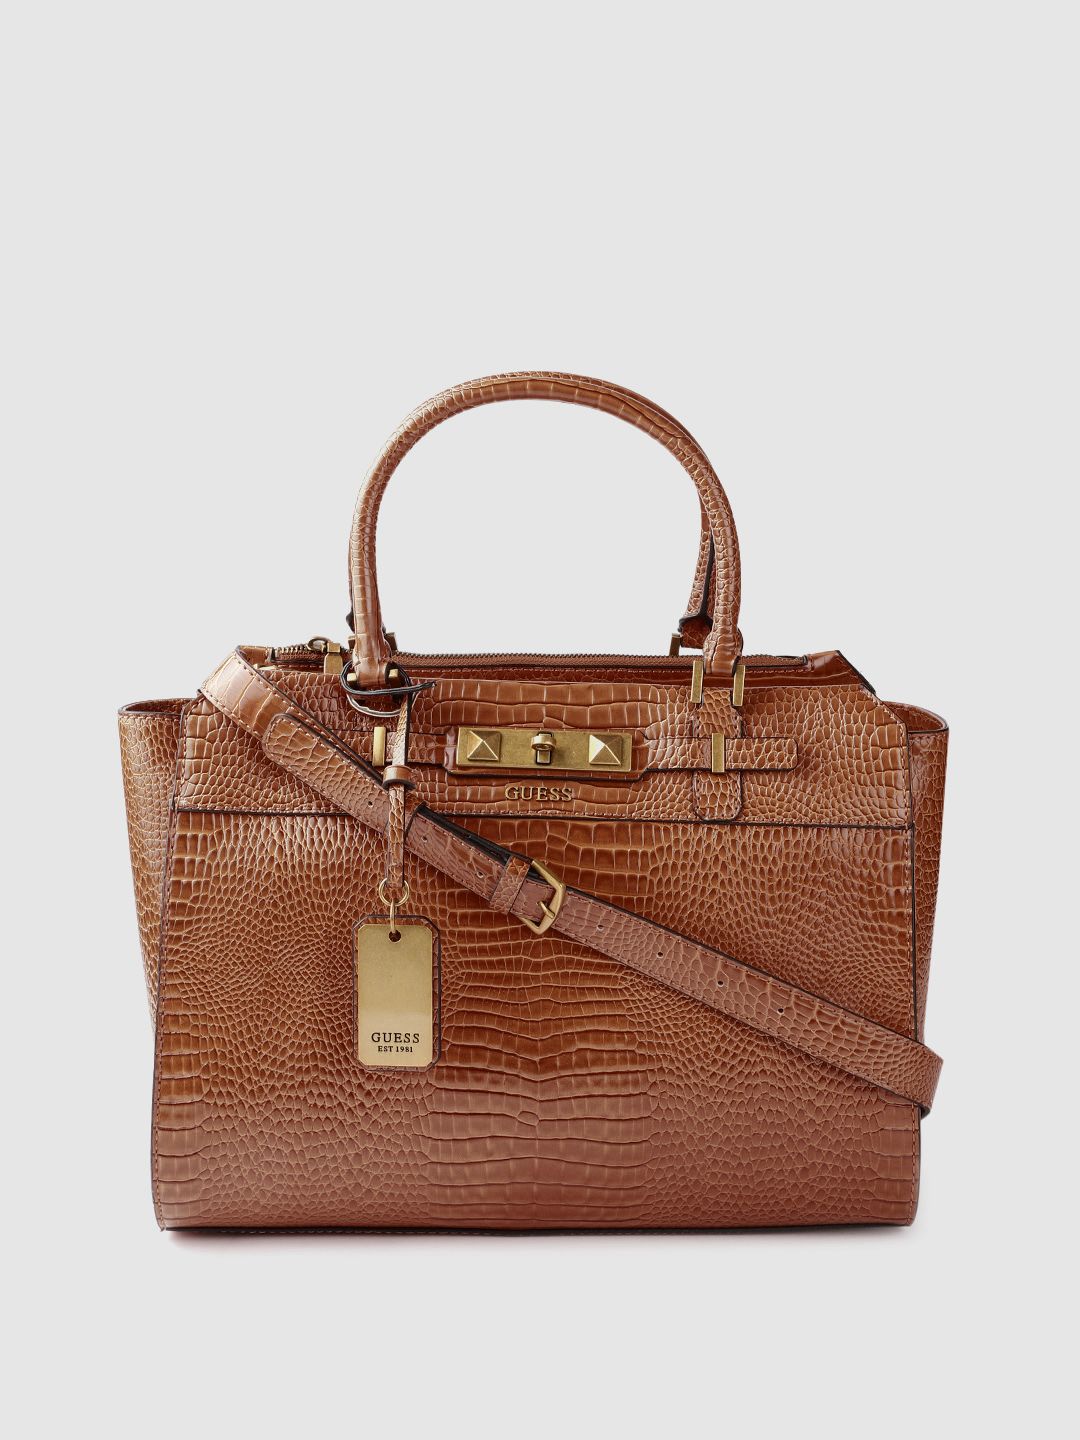 GUESS Brown Croc Textured Handheld Bag with Tab & Detachable Sling Strap Price in India